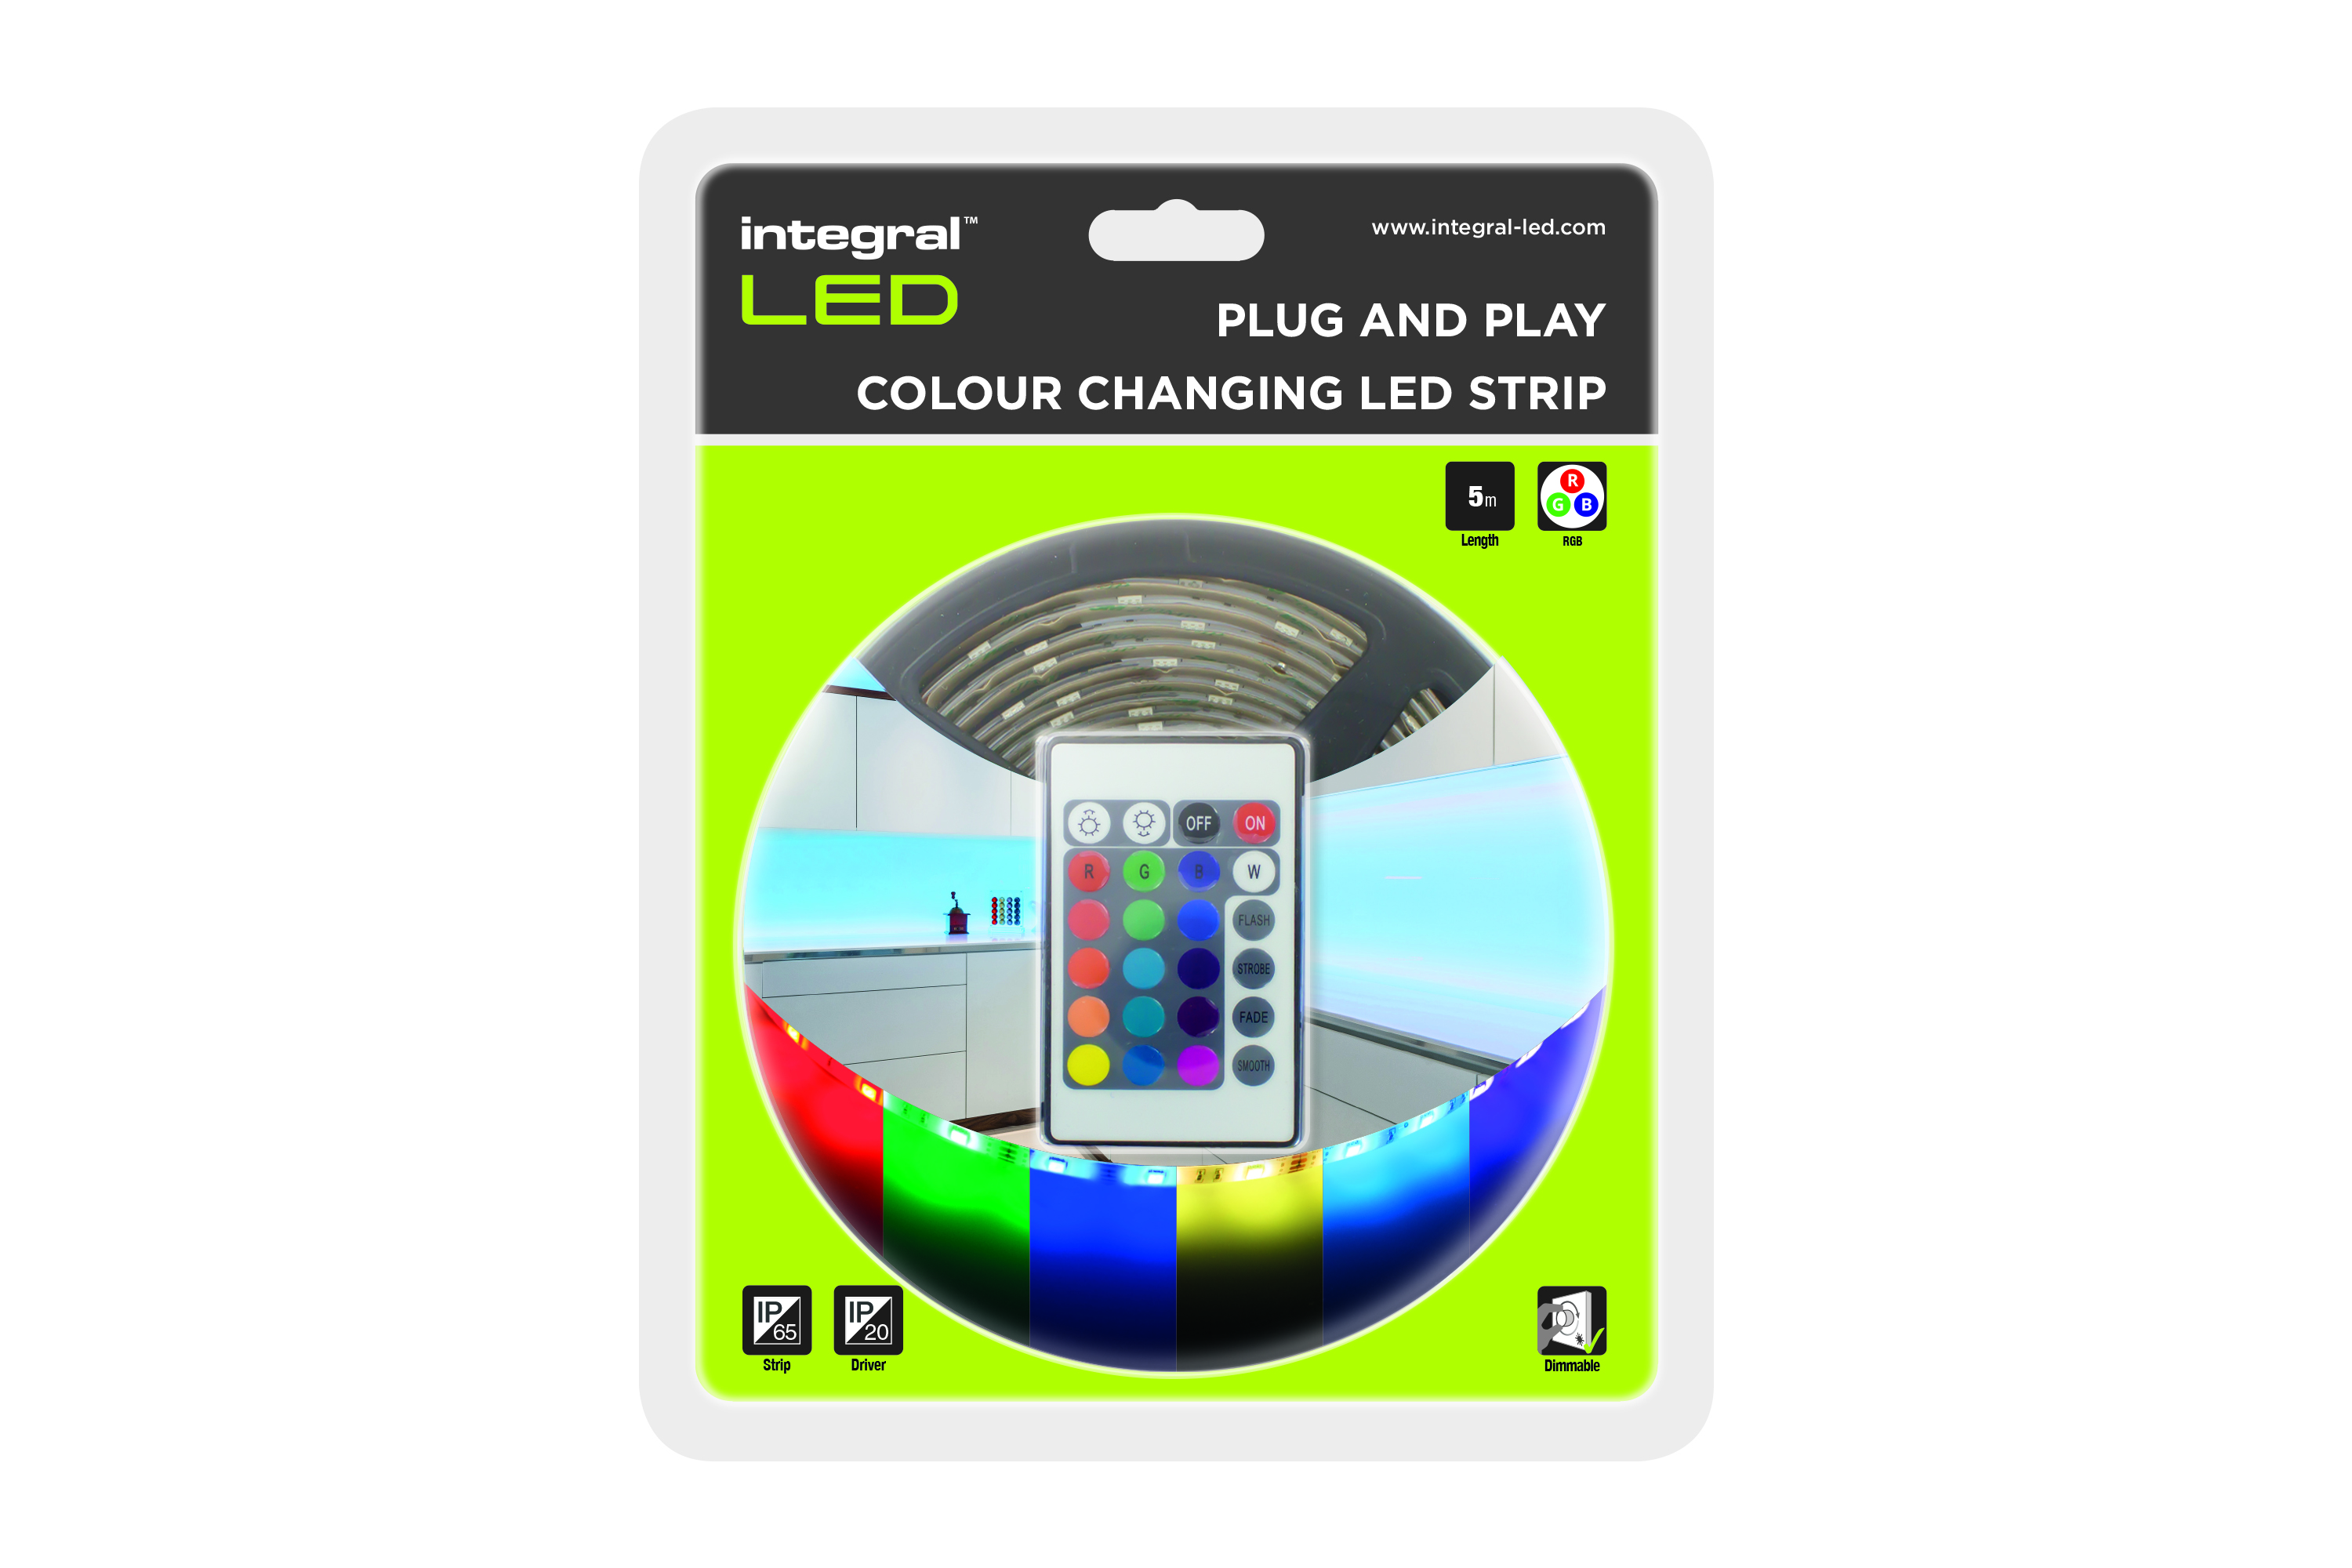 Henfald snack læser Integral LED | PLUG AND PLAY STRIP IP65 5M RGB 7.2W/M 30LED/M 10MM WIDTH  115 BEAM BLISTER WITH IR CONTROLLER AND IP20 UK PLUG ADAPTOR INTEGRAL